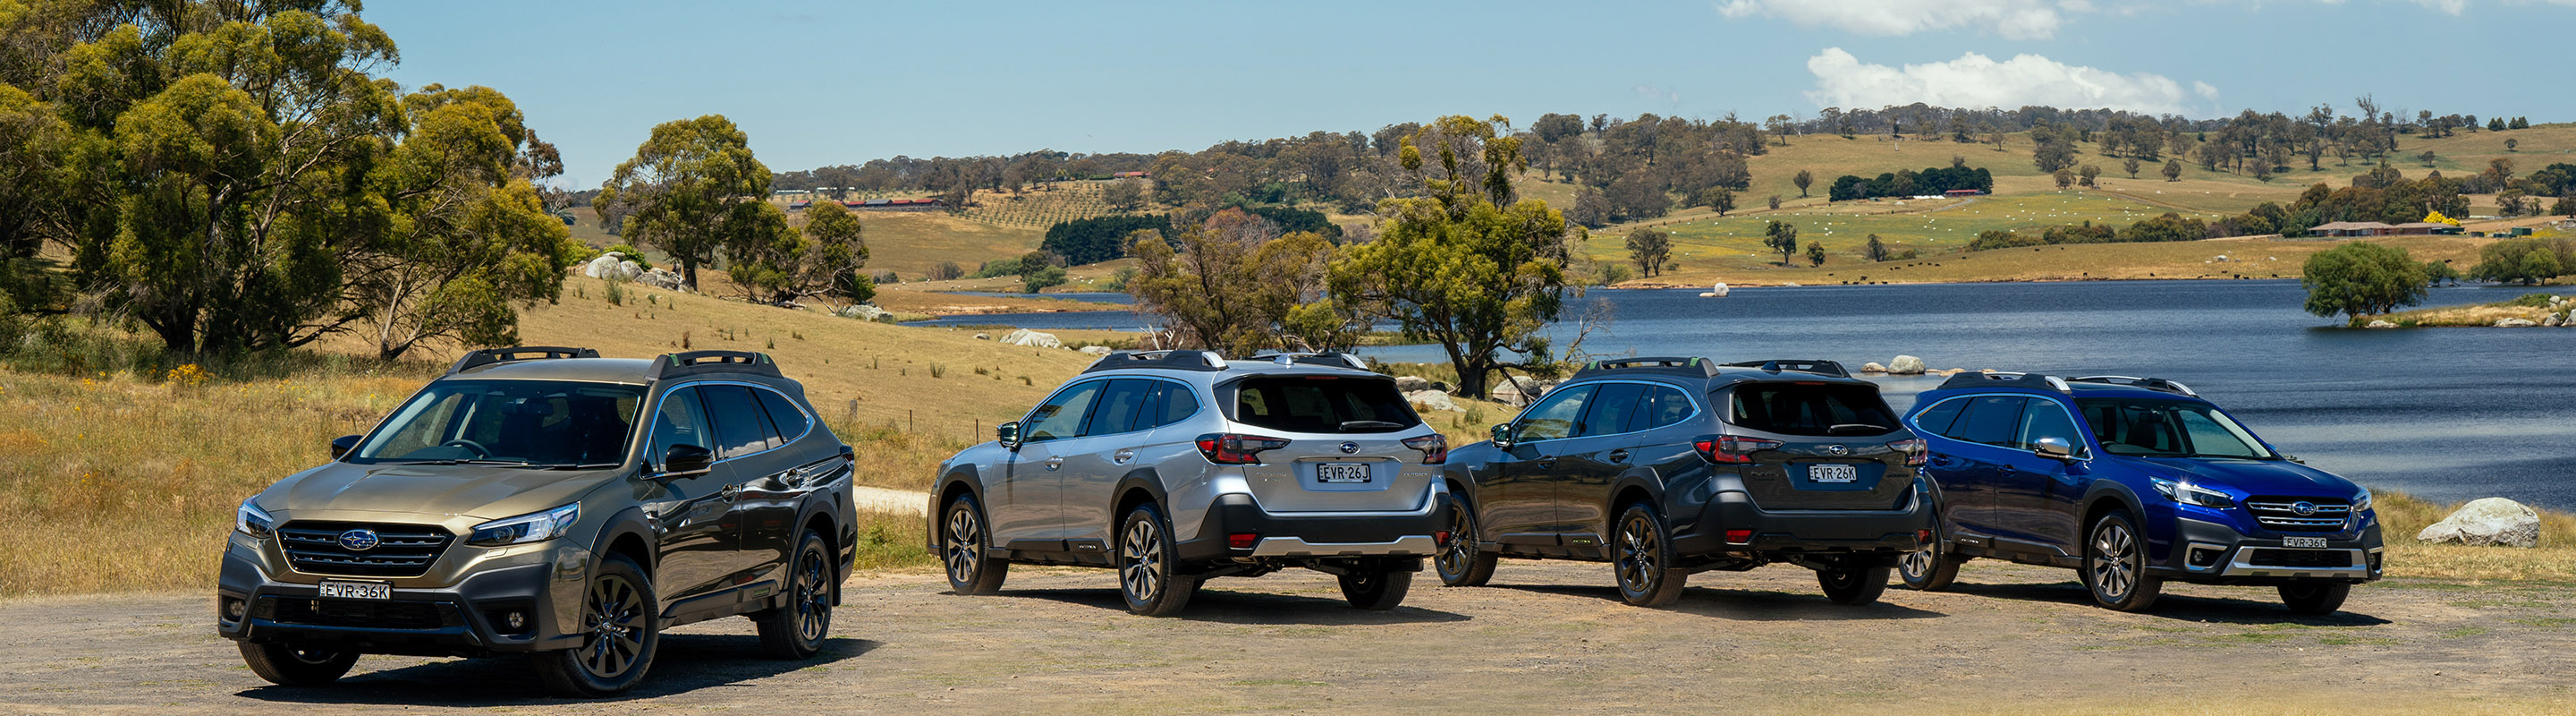 Subaru achieves outstanding sales milestone in June, led by record-breaking Outback performance and SUV line-up success